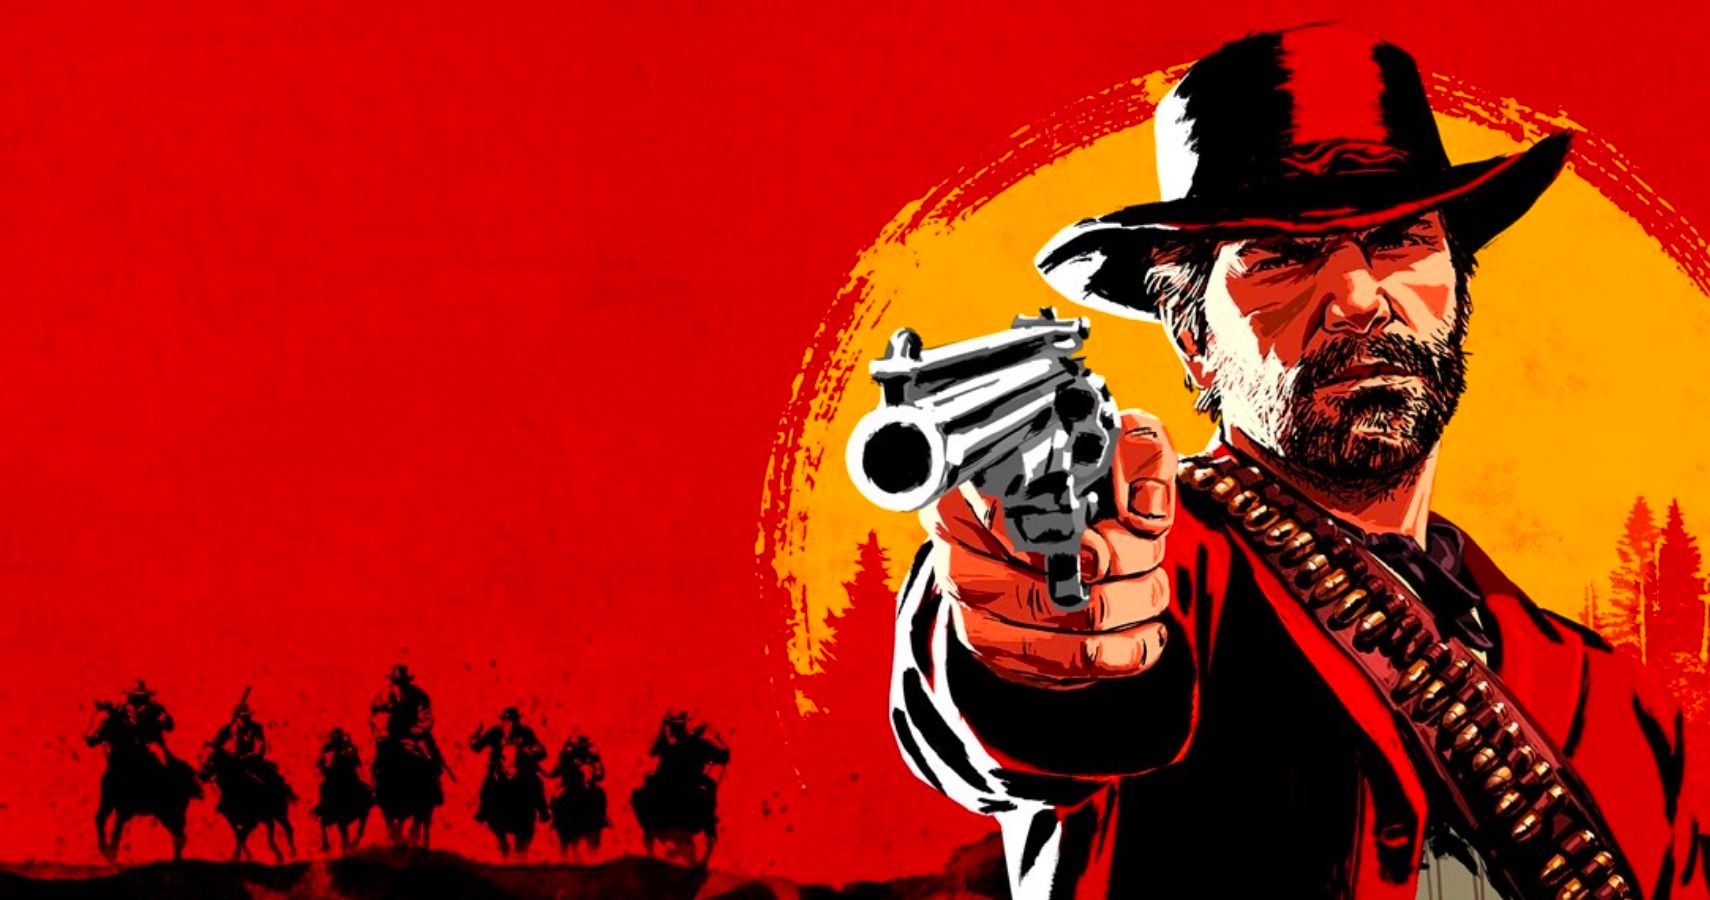 red dead redemption play store